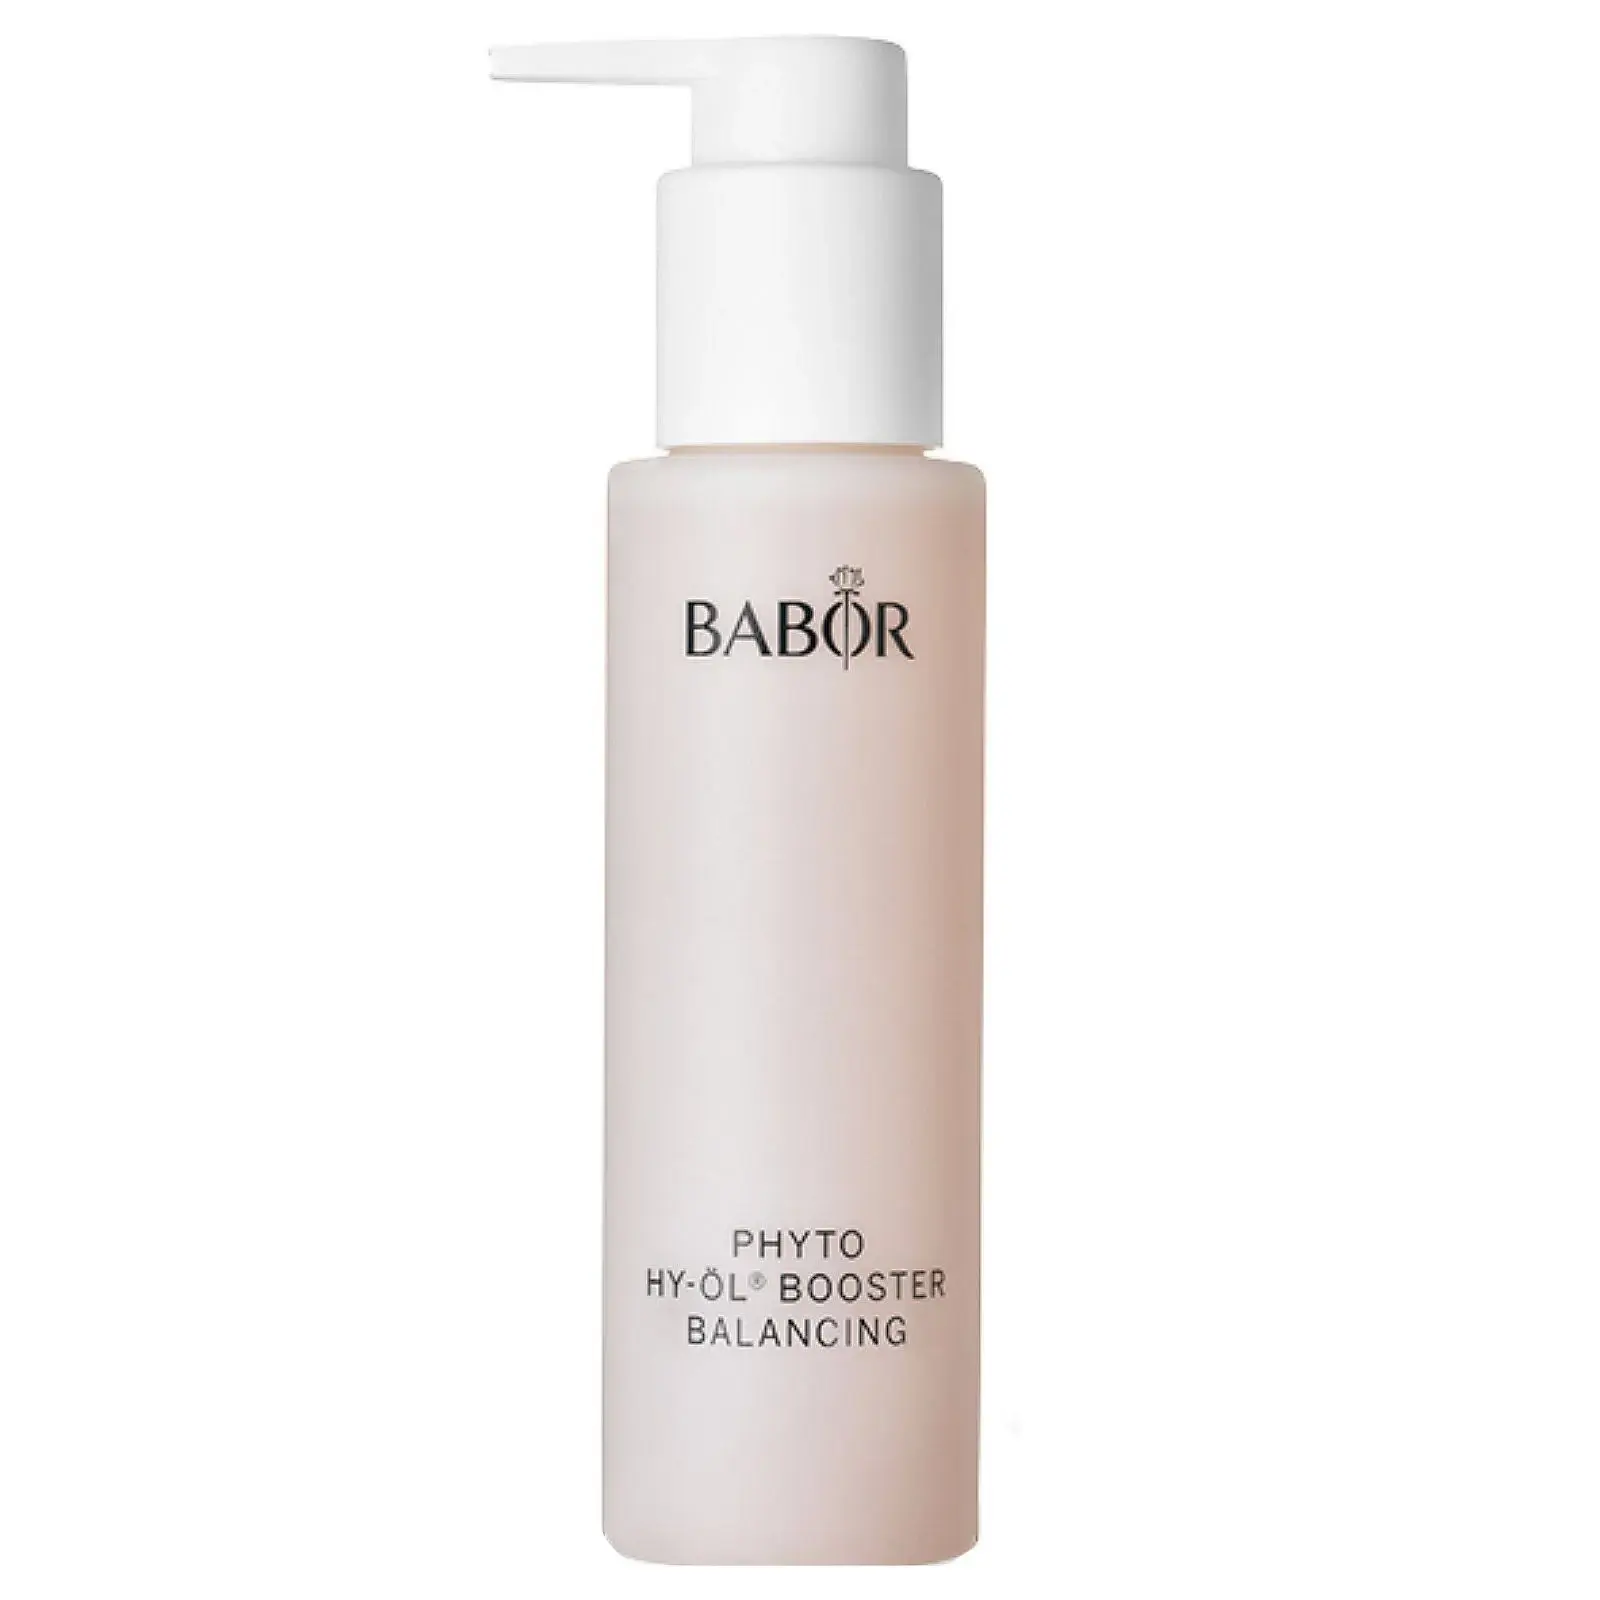 Babor - Cleansing Phyto HY-ÖL Booster Balancing 100 ml